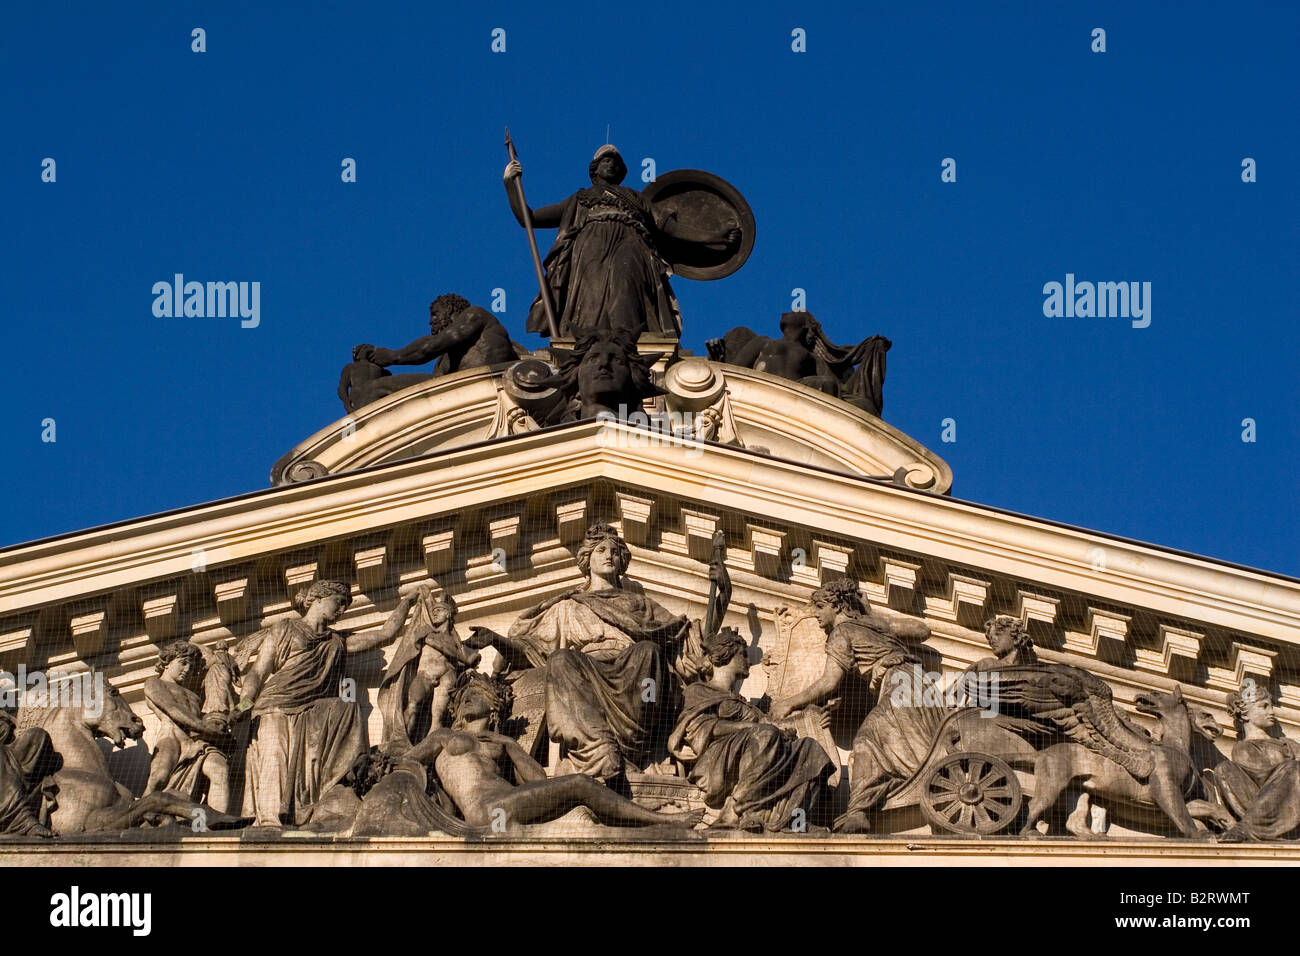 A detail from the Albetinium in the Altstadt of Dresden. The building contains the State Sculpture and New Masters collection. Stock Photo